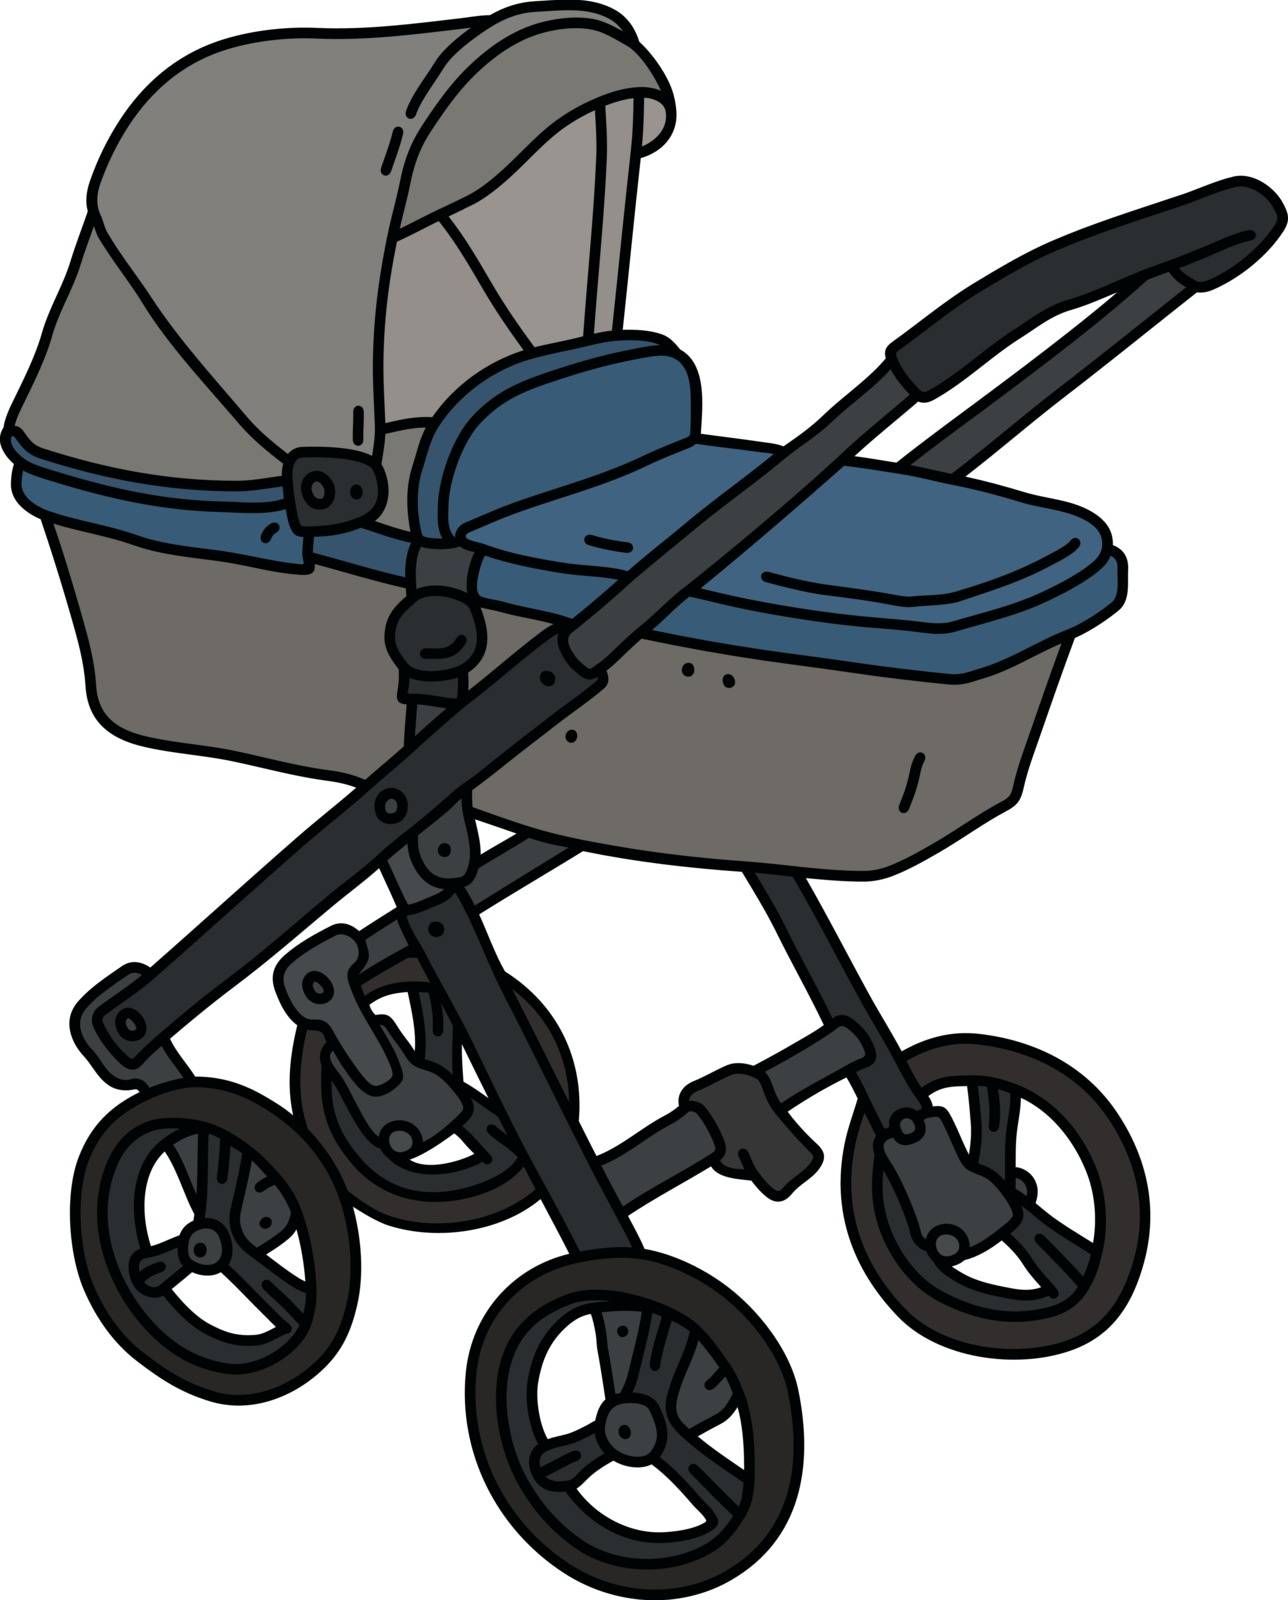 The blue and gray stroller by vostal